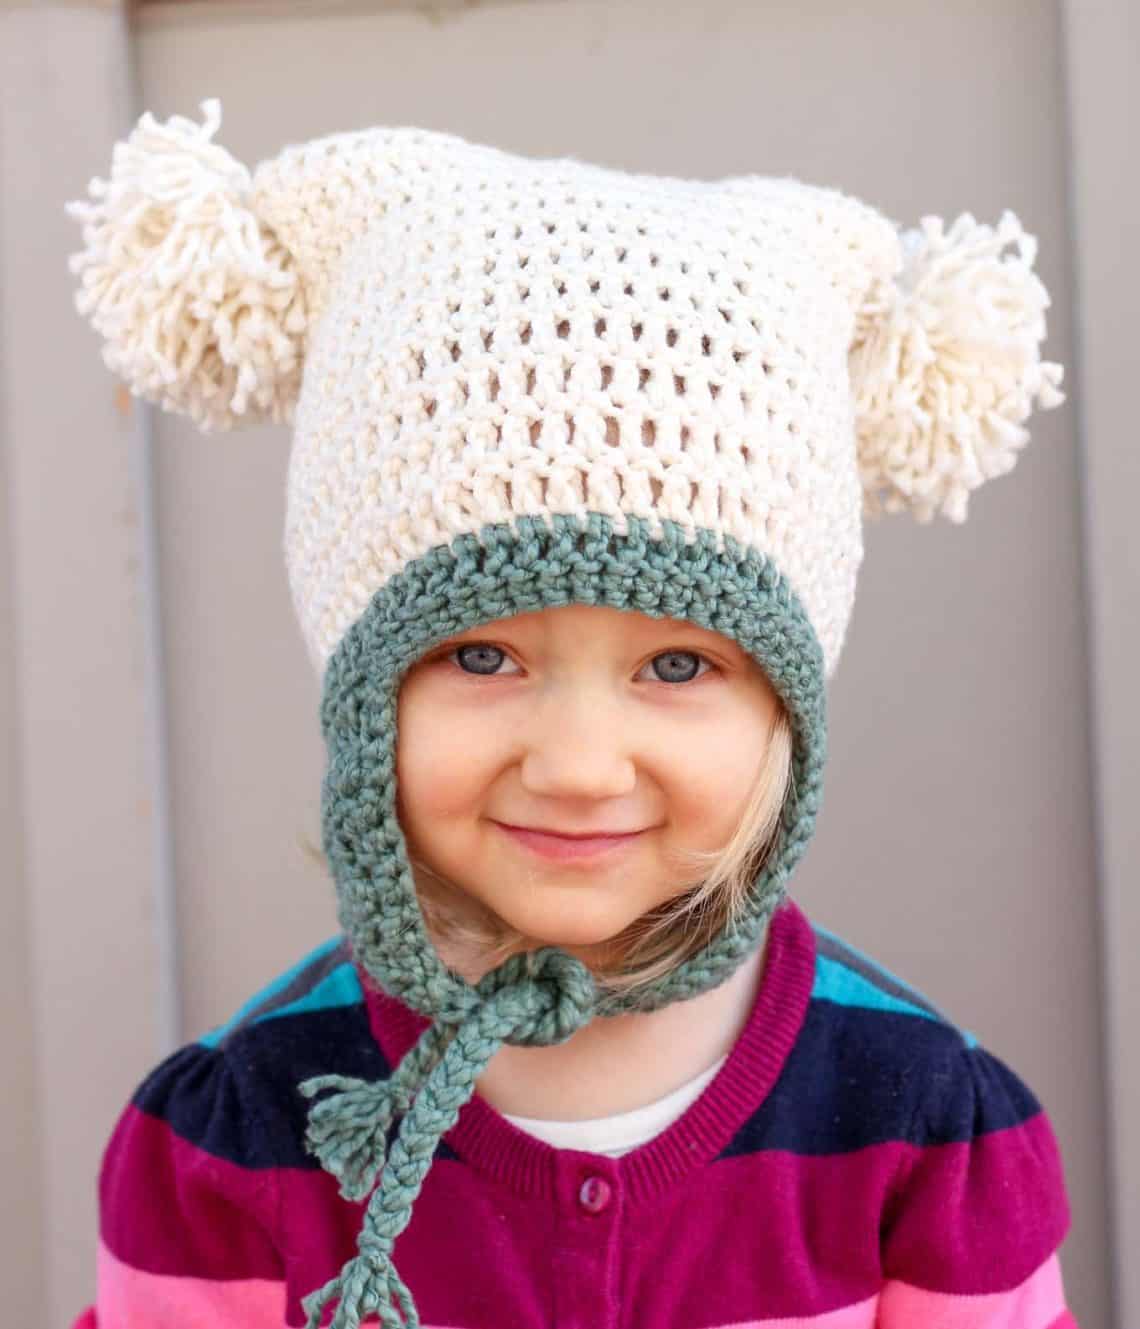 This free crochet beanie pattern is perfect for beginners because the skills involved aren't much harder than making a scarf. Free pom pom hat pattern in sizes baby (newborn), 3-6 months, 6-12 months, toddler/preschooler, child, teen/adult. | MakeAndDoCrew.com